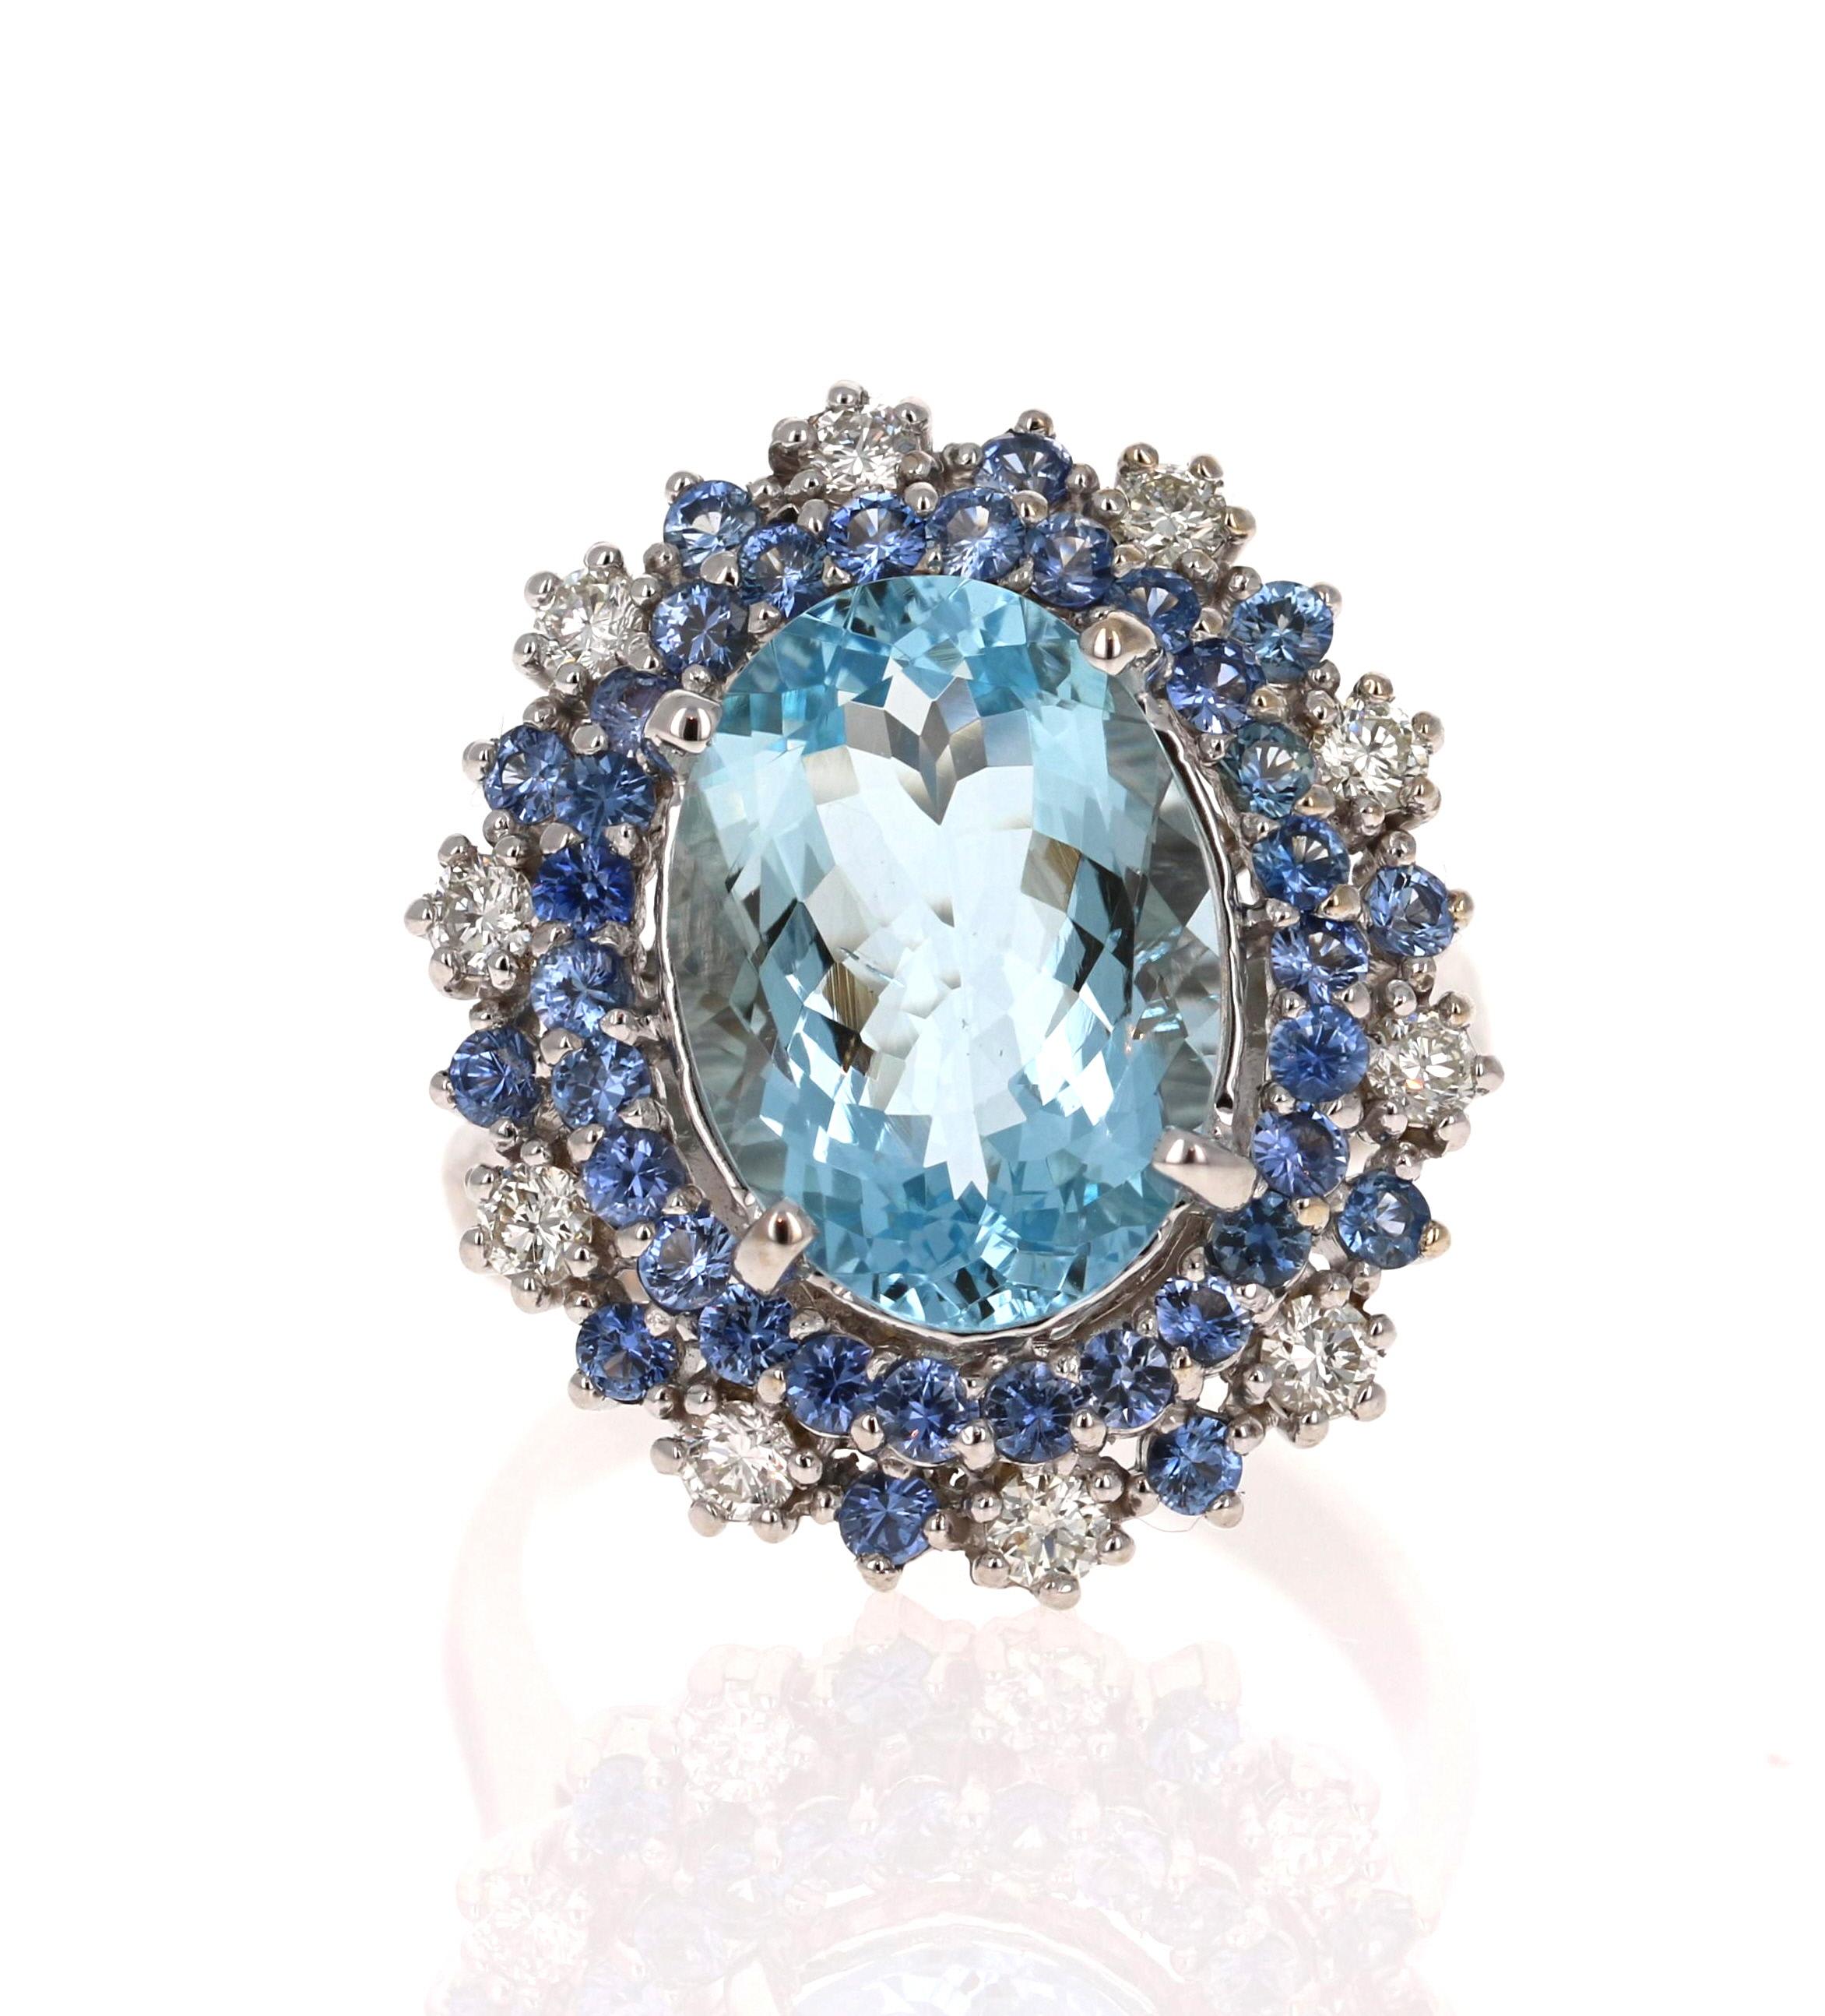 This ring has a beautiful 4.57 Carat Oval Cut Aquamarine and is surrounded by 36 Round Cut Sapphires that weigh approximately 1.57 carats and 10 Round Cut Diamonds that weigh 0.43 Carats (Clarity: VS, Color: H). The total carat weight of this ring